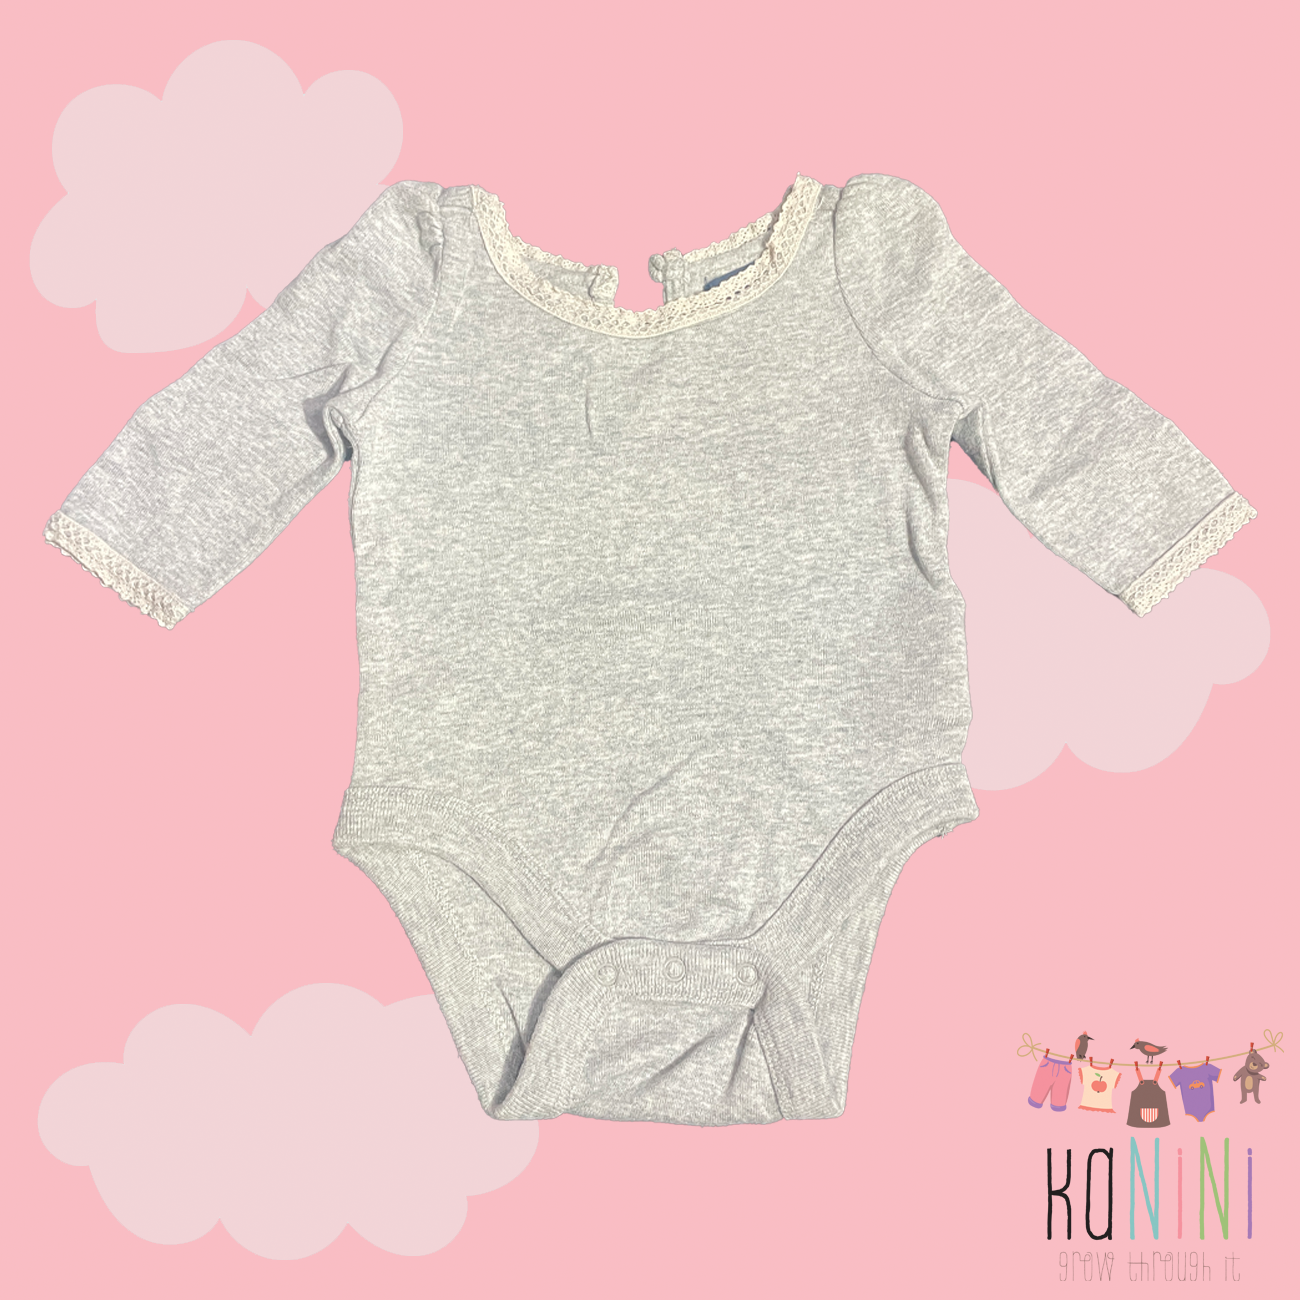 Featured image for “Baby GAP 0 - 3 Months Girls Long Sleeve Romper”